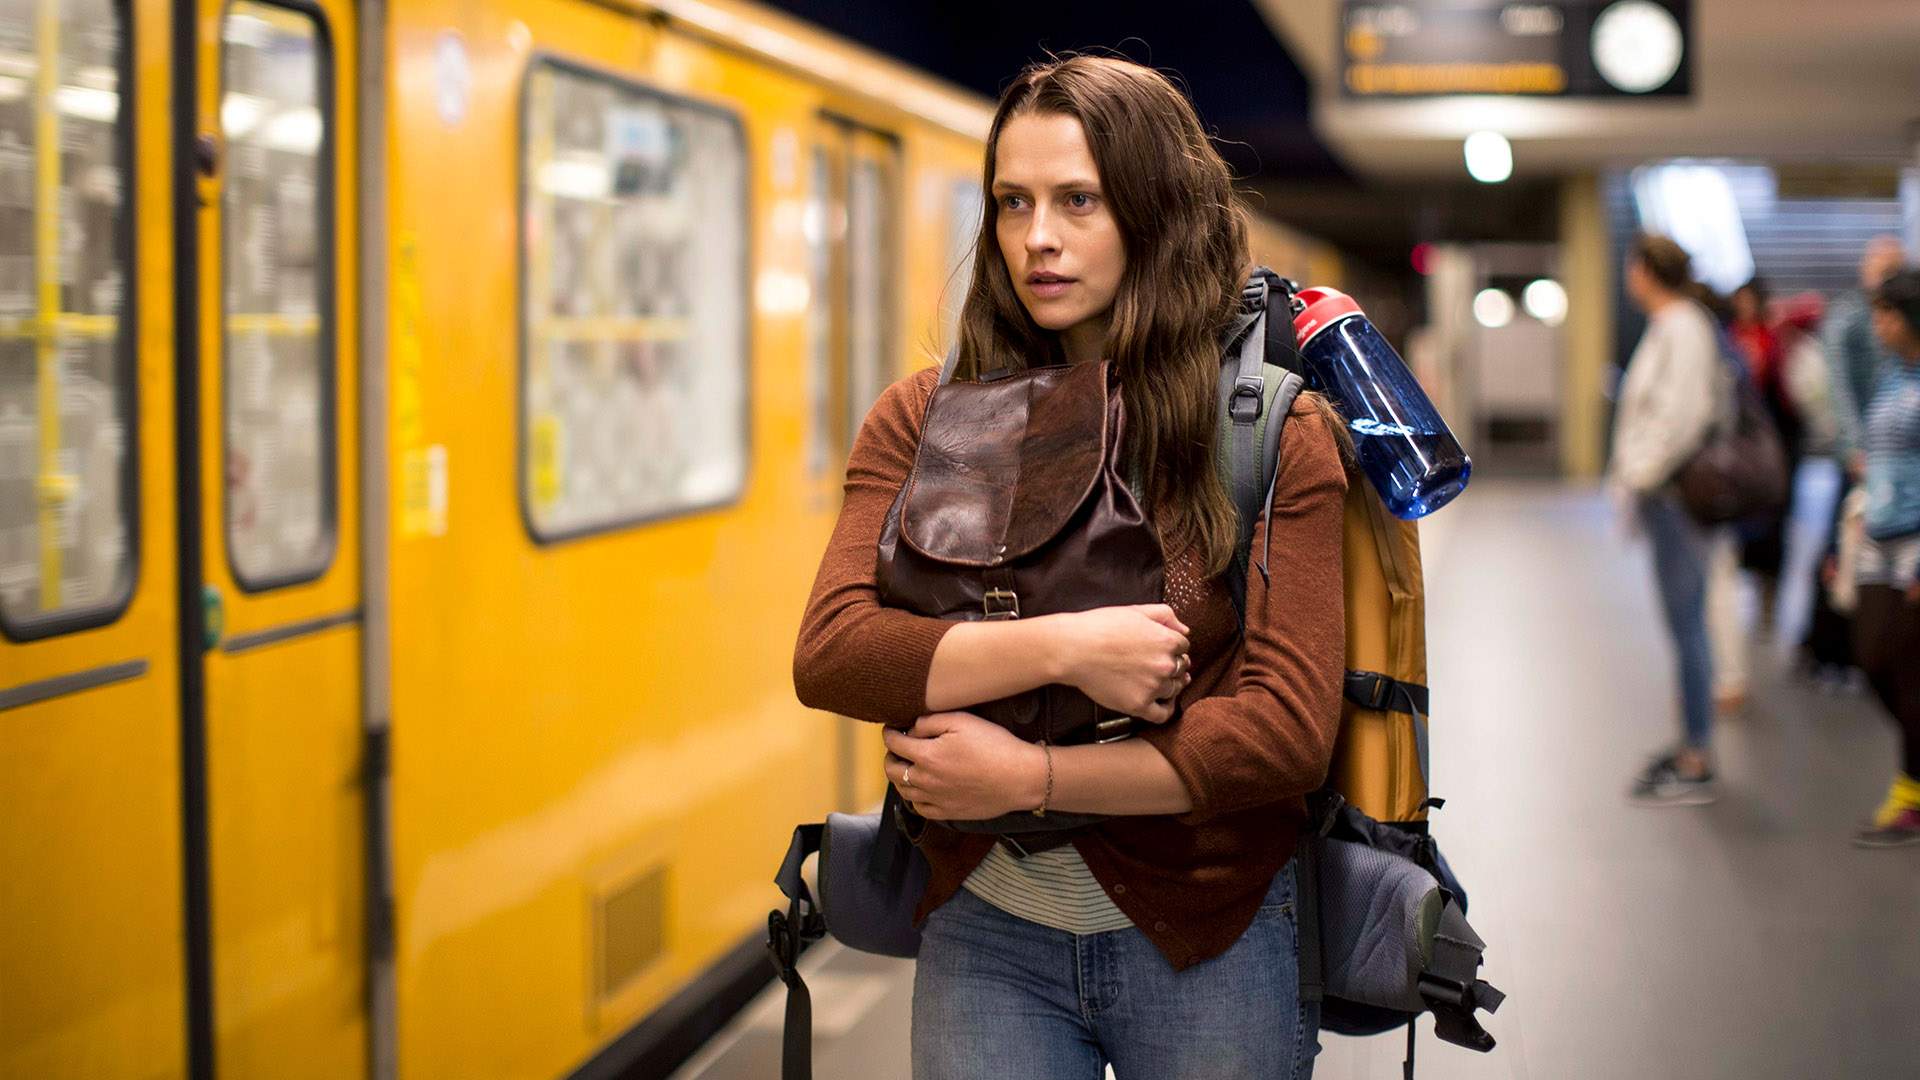 We're Hosting An Advanced Screening of 'Berlin Syndrome' in Melbourne